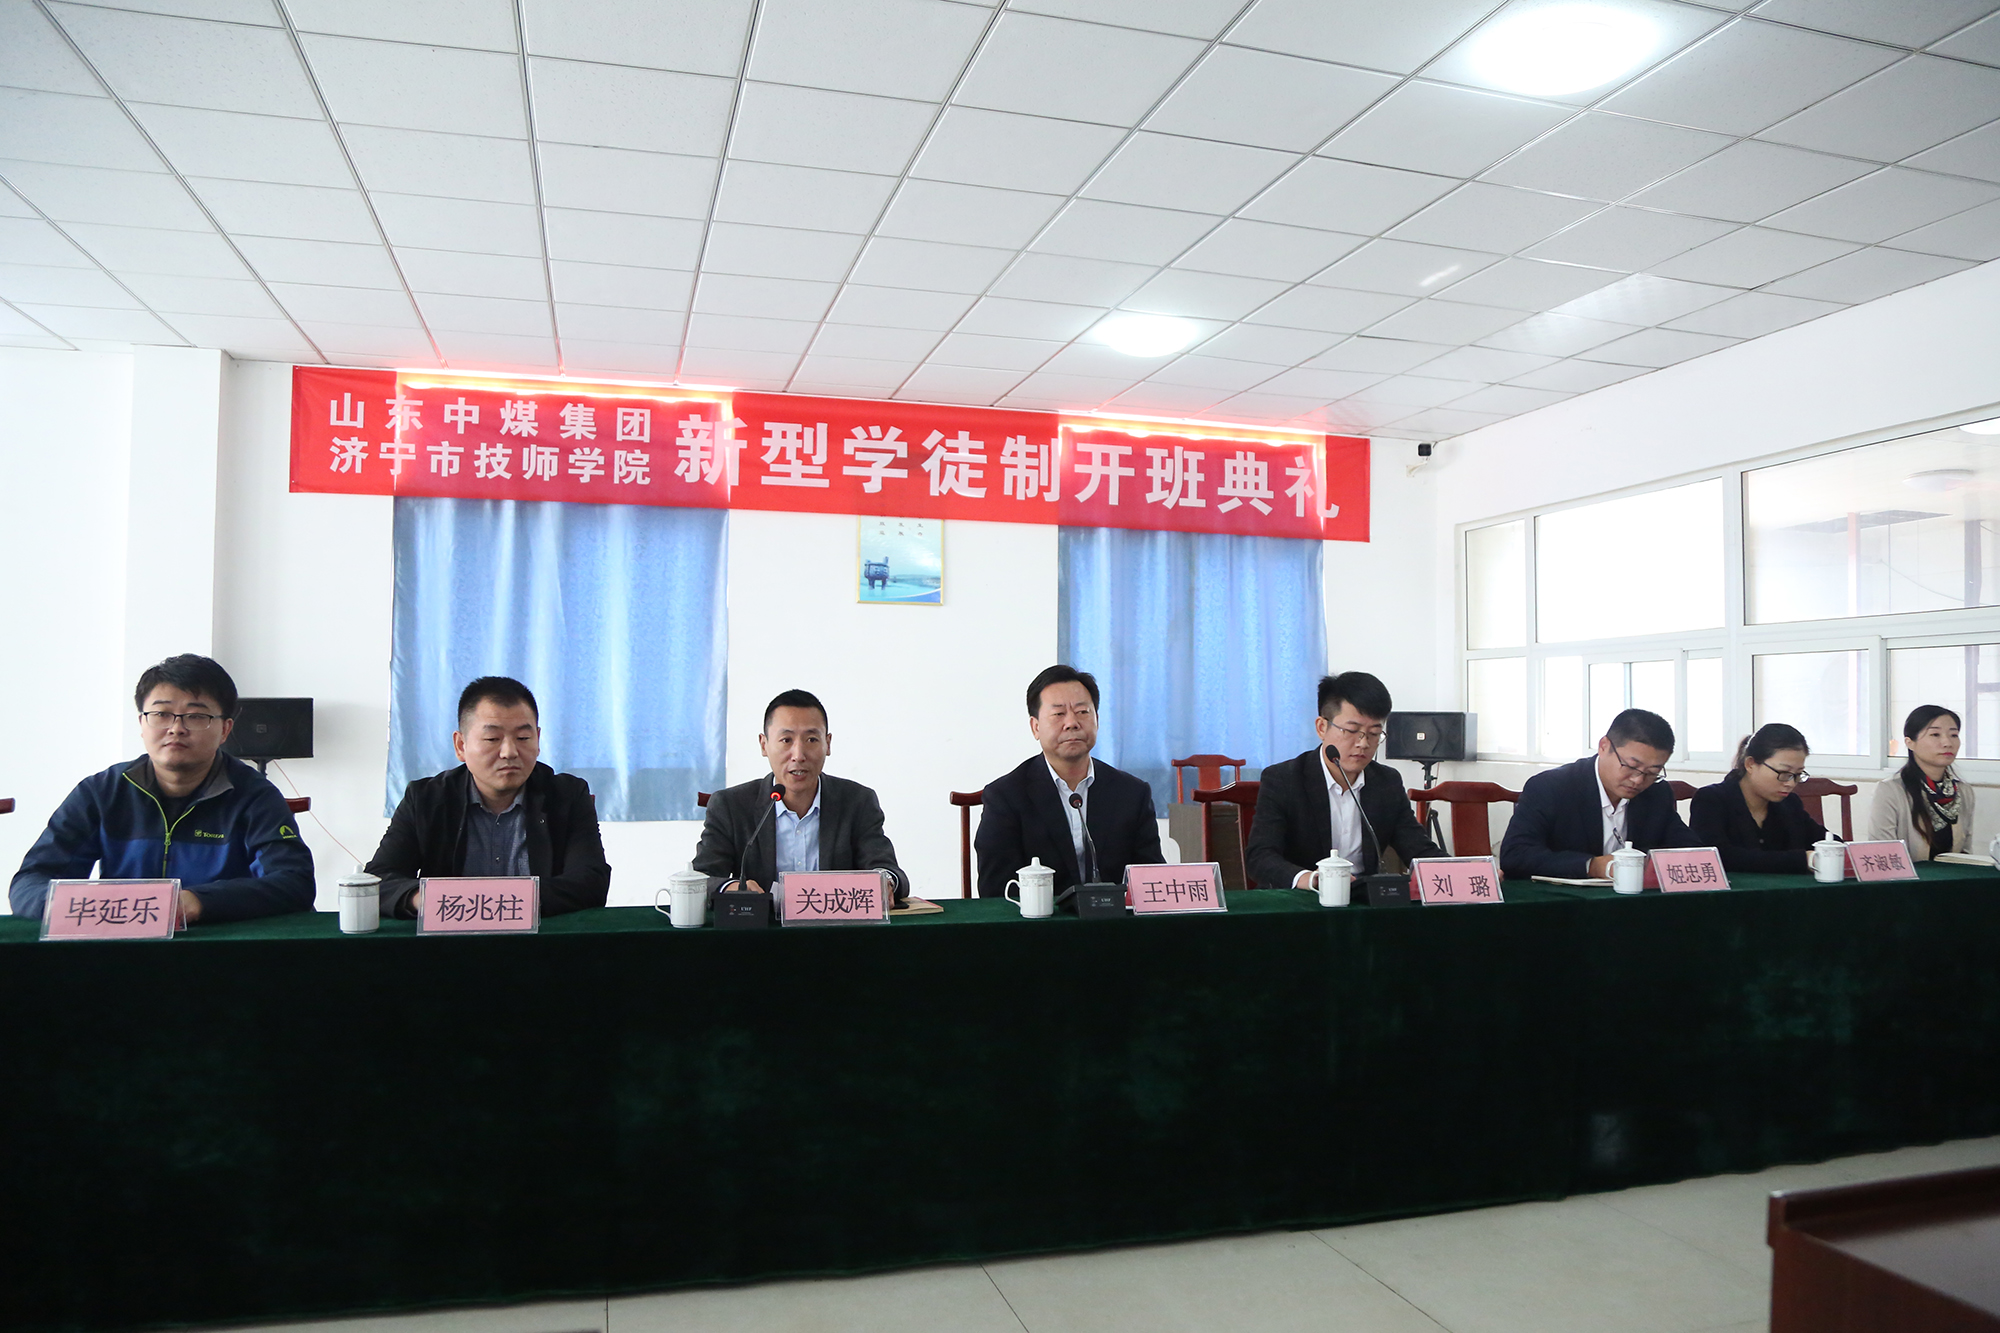 China Coal Group And Jining Technician College New Apprenticeship Training Opening Ceremony Held